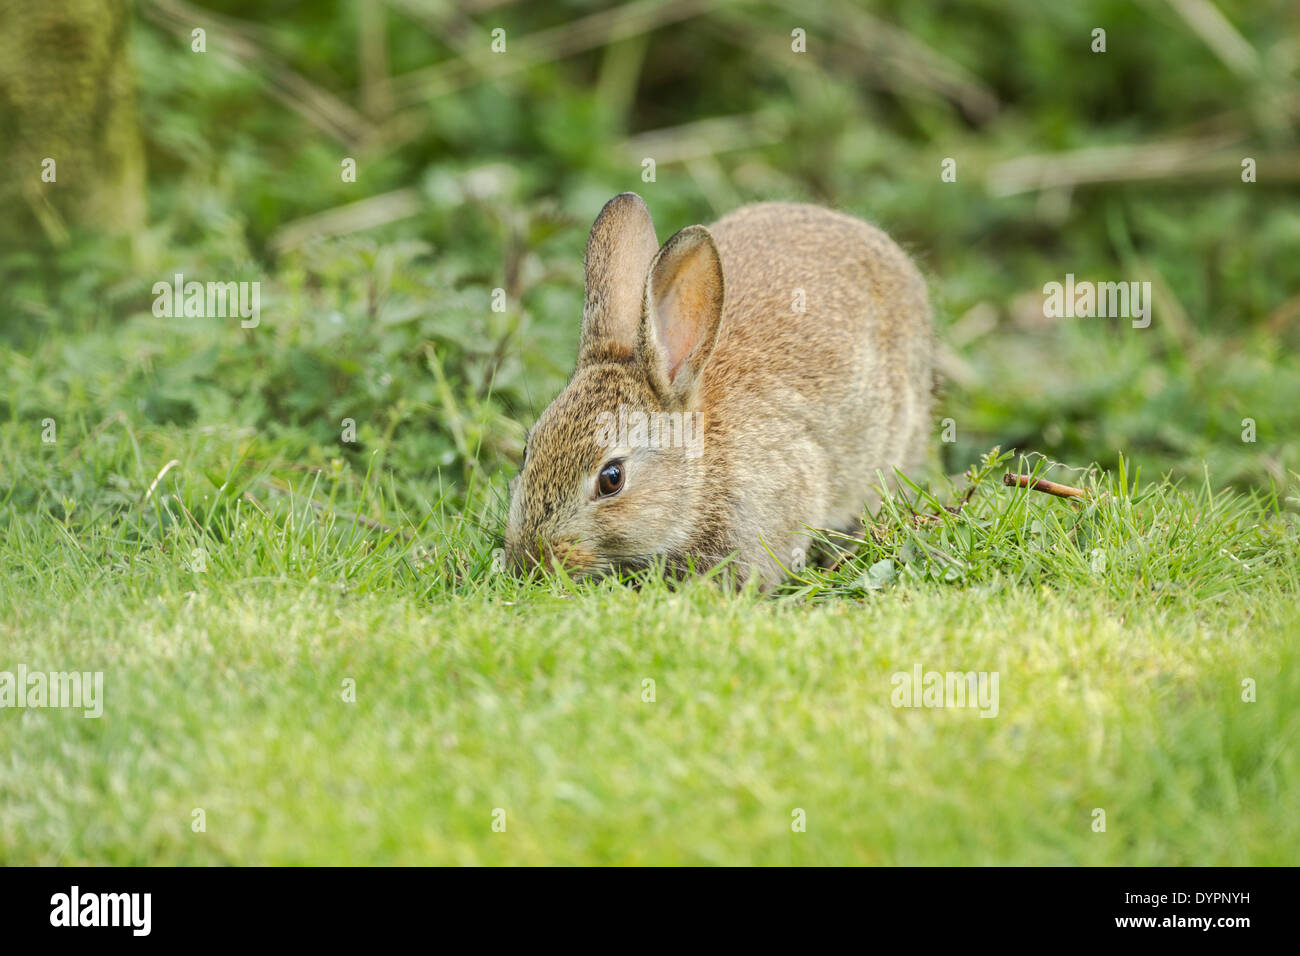 Wild rabbit, Latin name Oryctolagus cuniculus, foraging at the edge of a grassy field Stock Photo